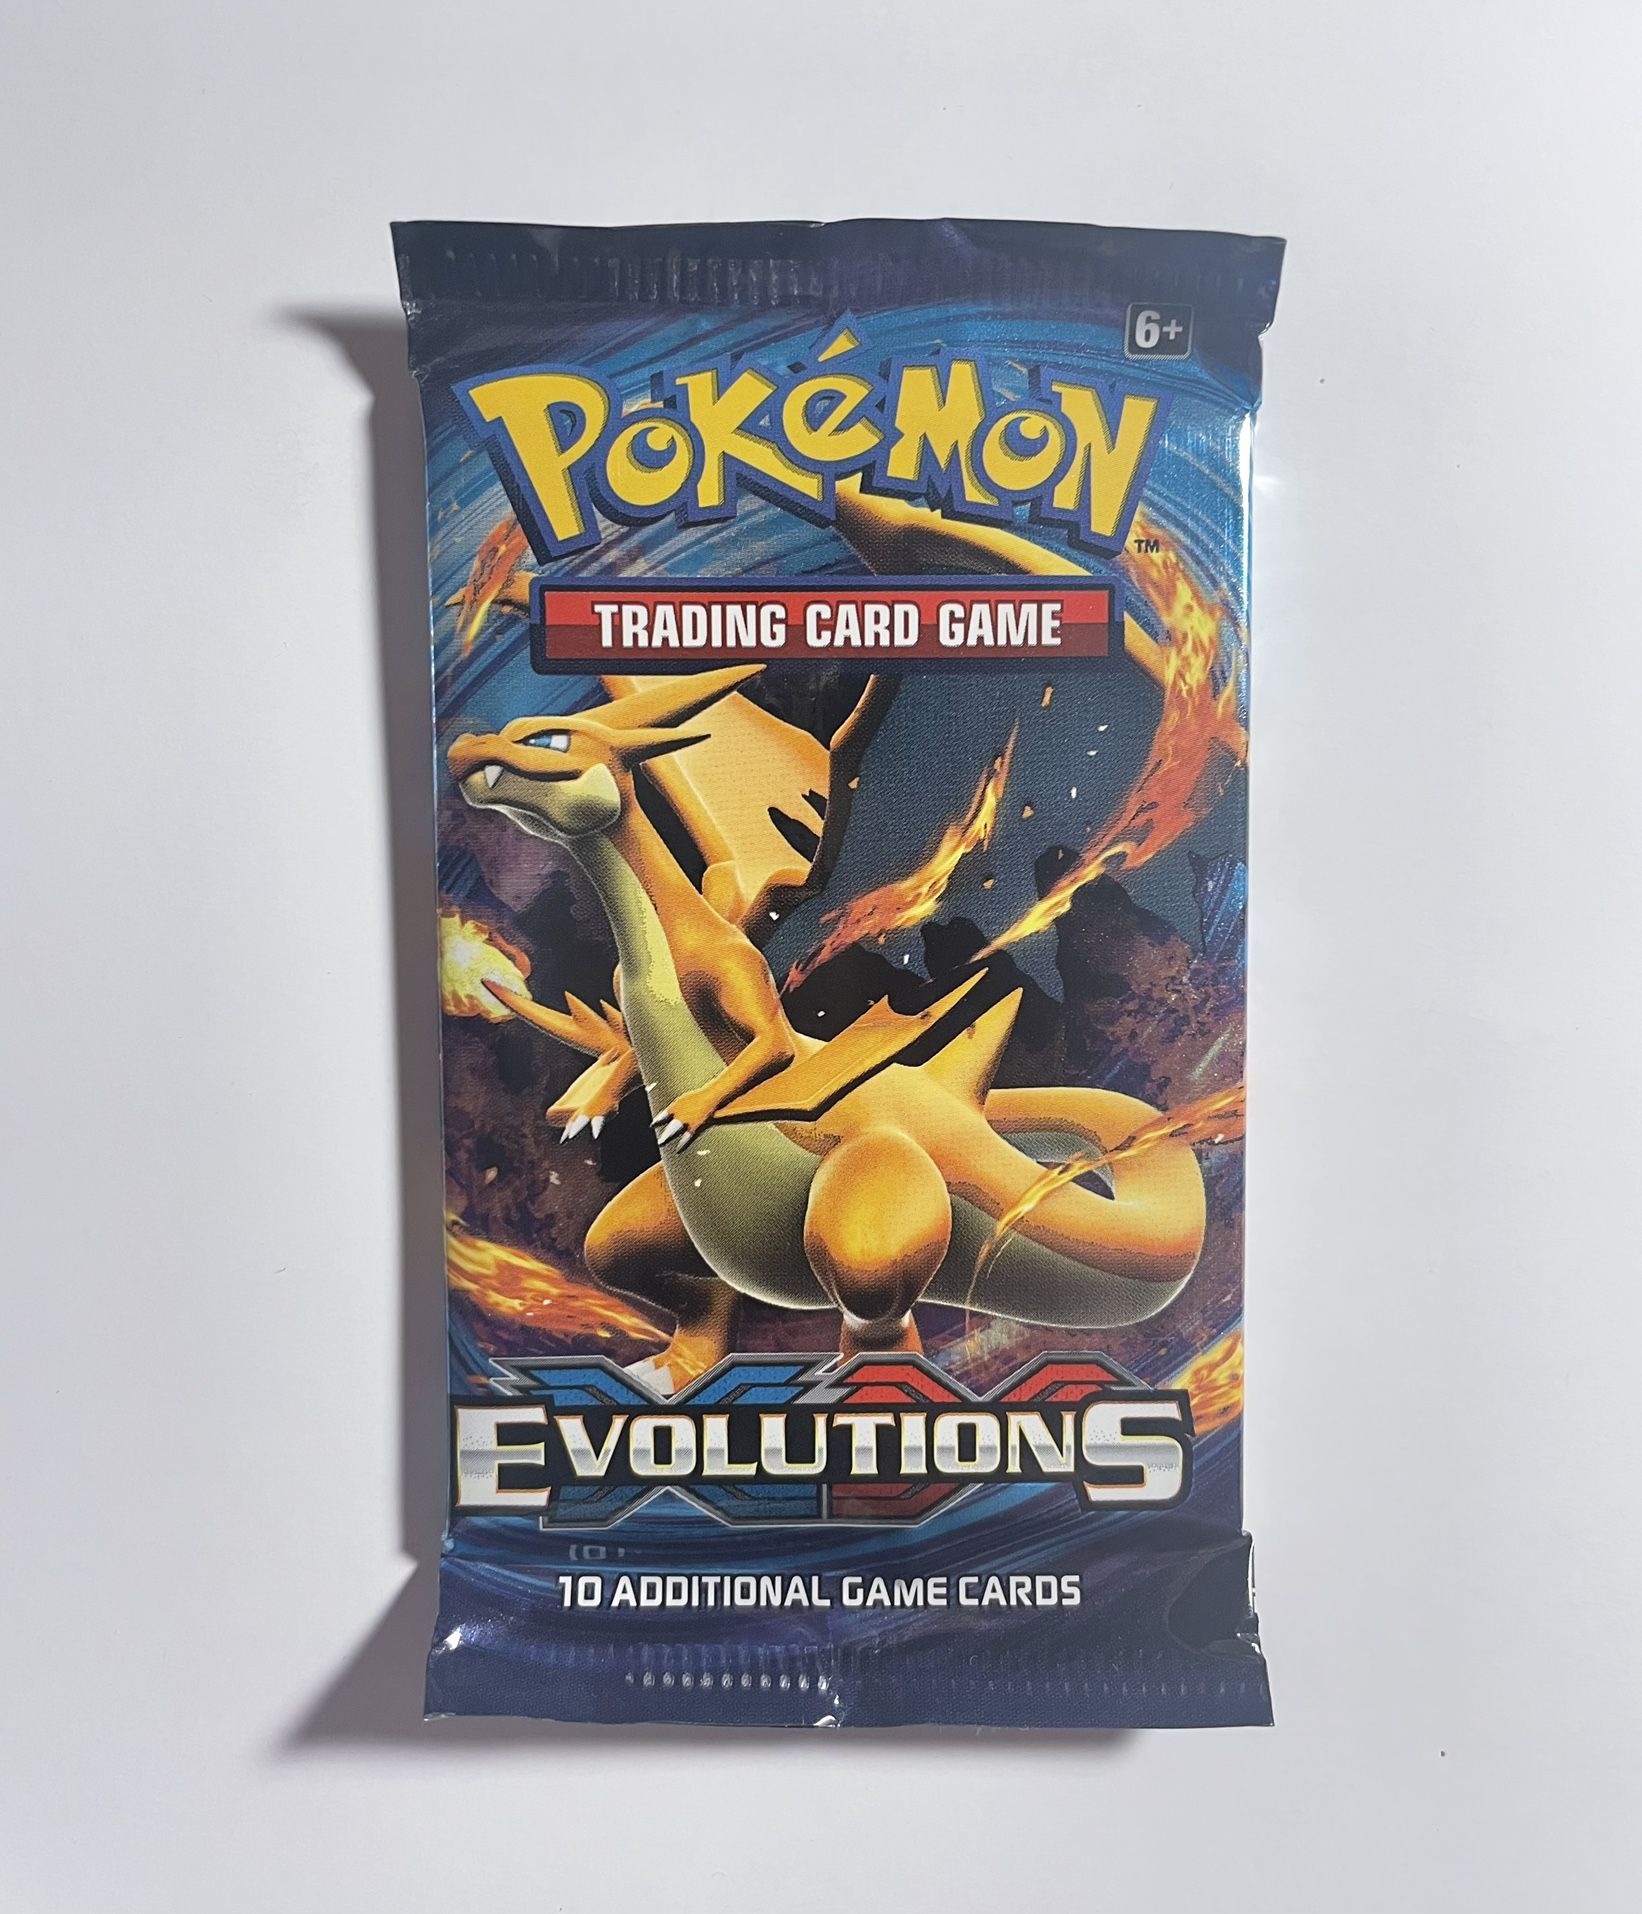 2016 Pokemon TCG XY Evolutions 10 card Booster Pack (Charizard artwork pack)  